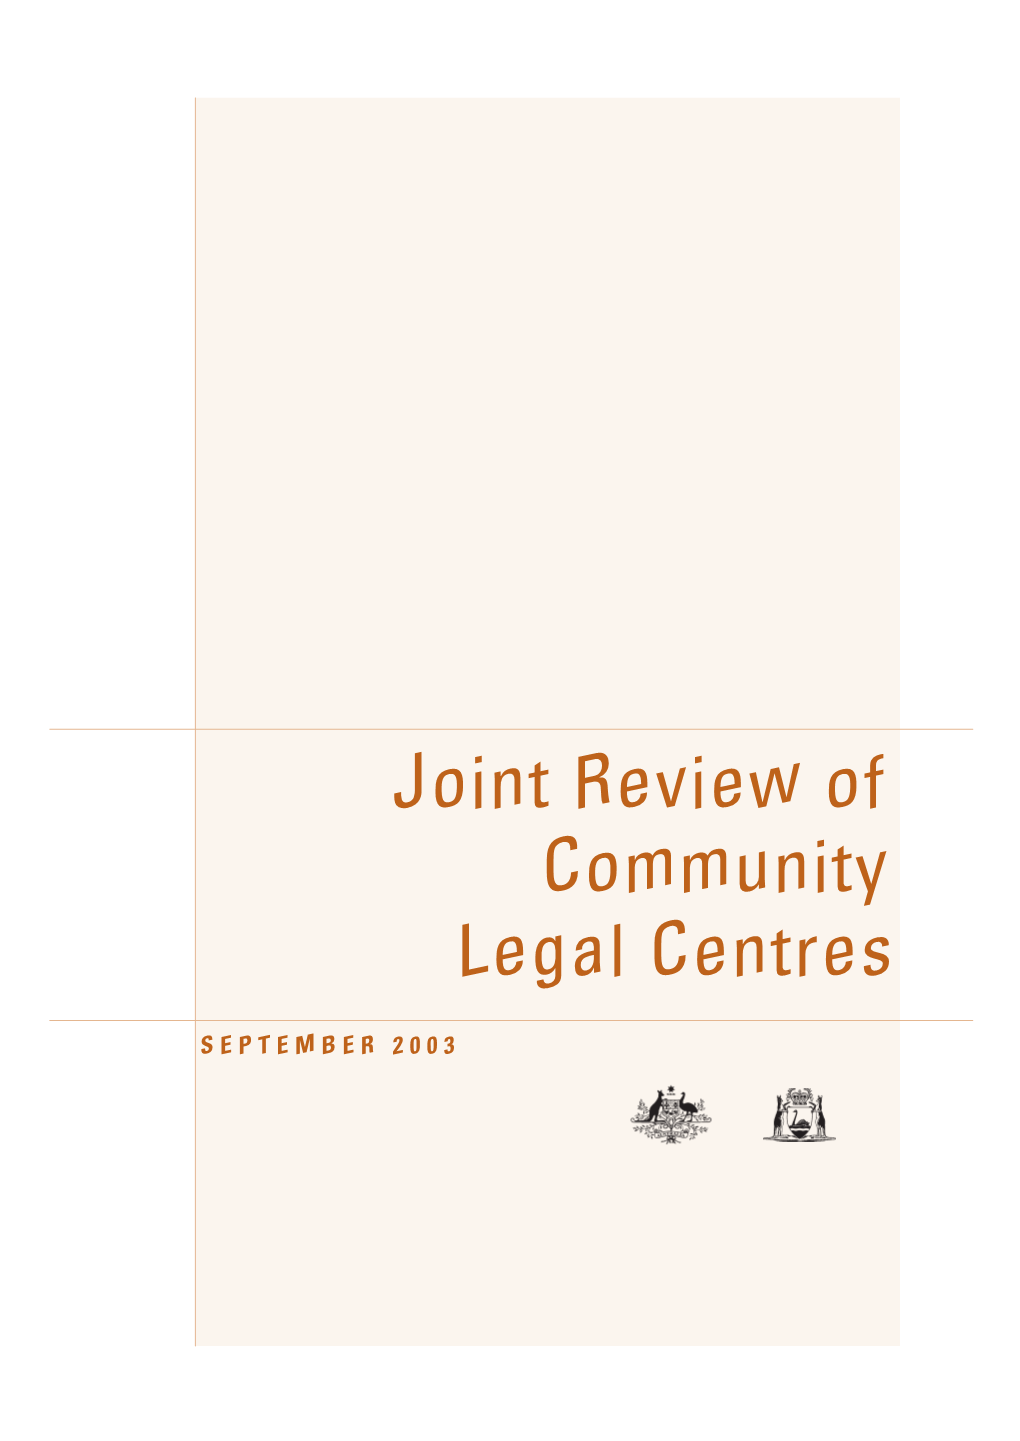 Joint Review of Community Legal Centres in WA